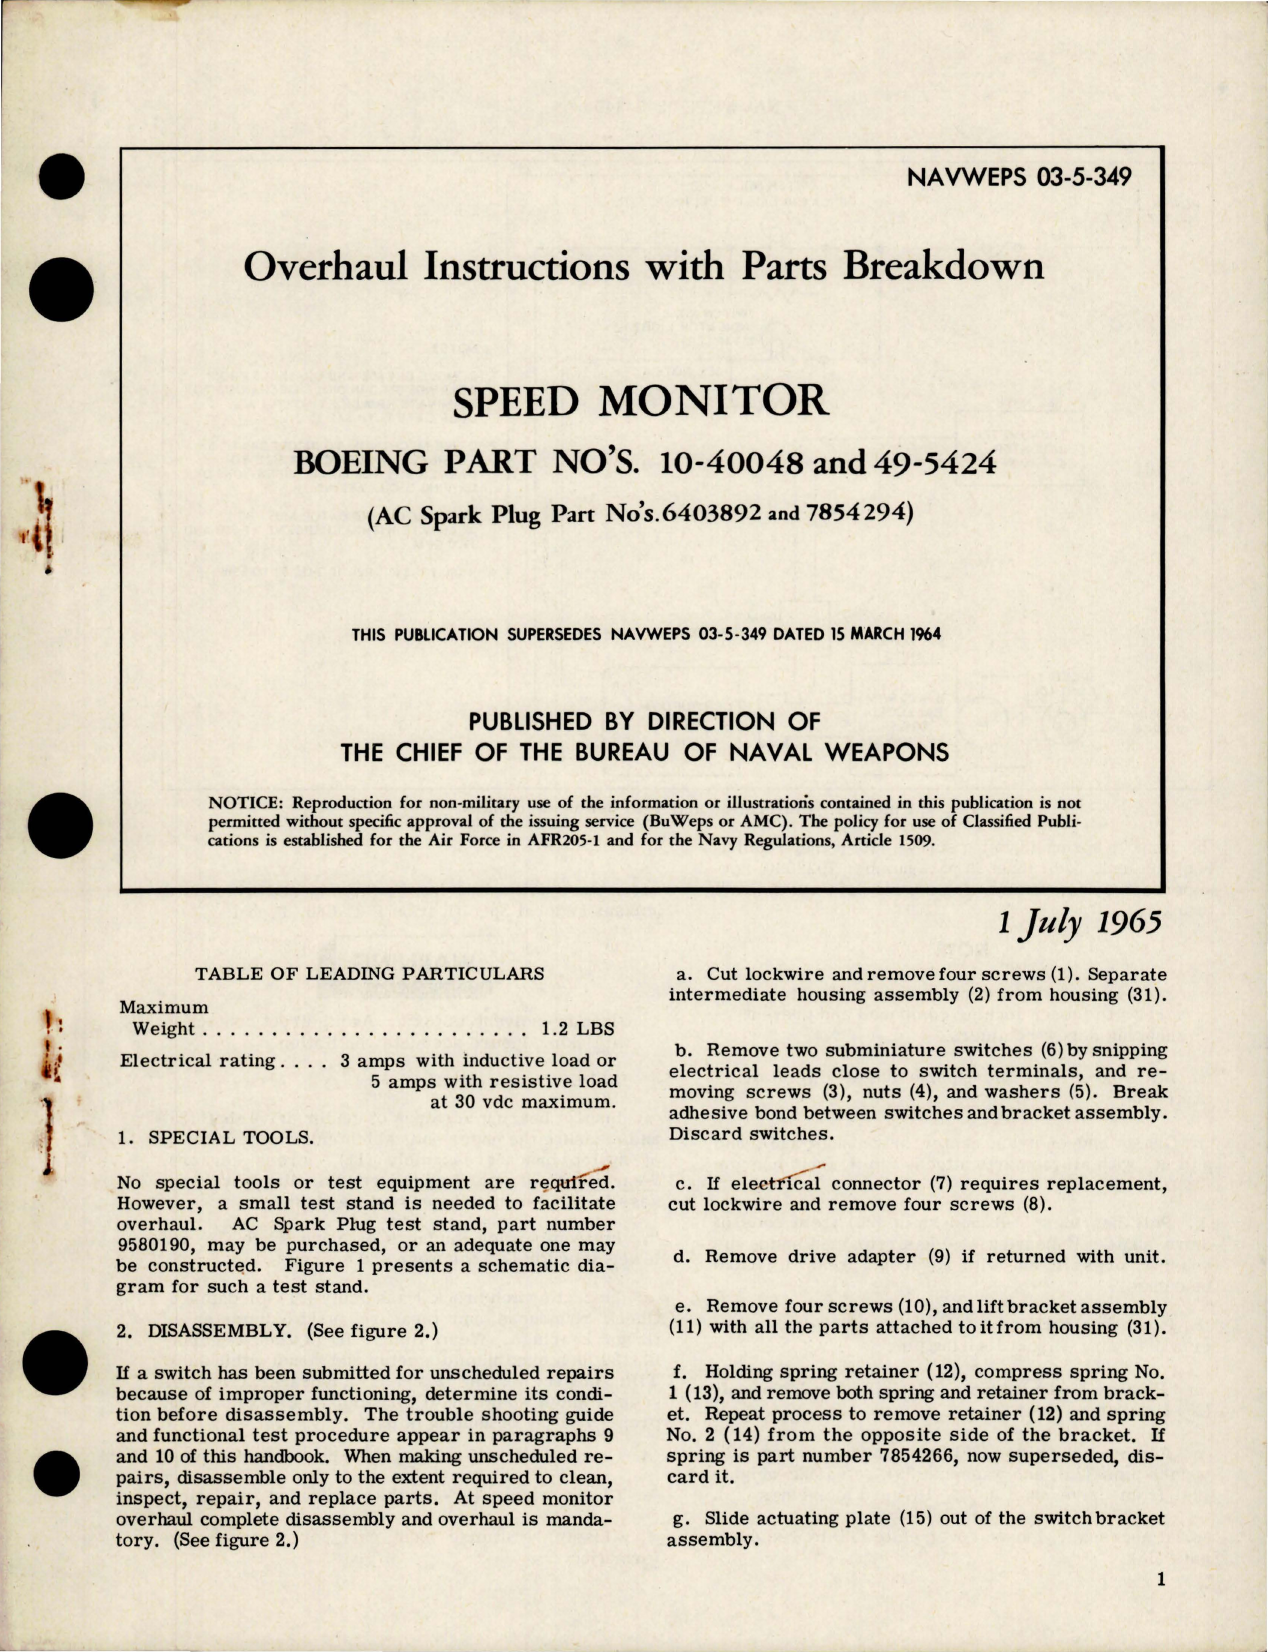 Sample page 1 from AirCorps Library document: Overhaul Instructions with Parts Breakdown for Speed Monitor - Boeing Part 10-40048 and 49-5424